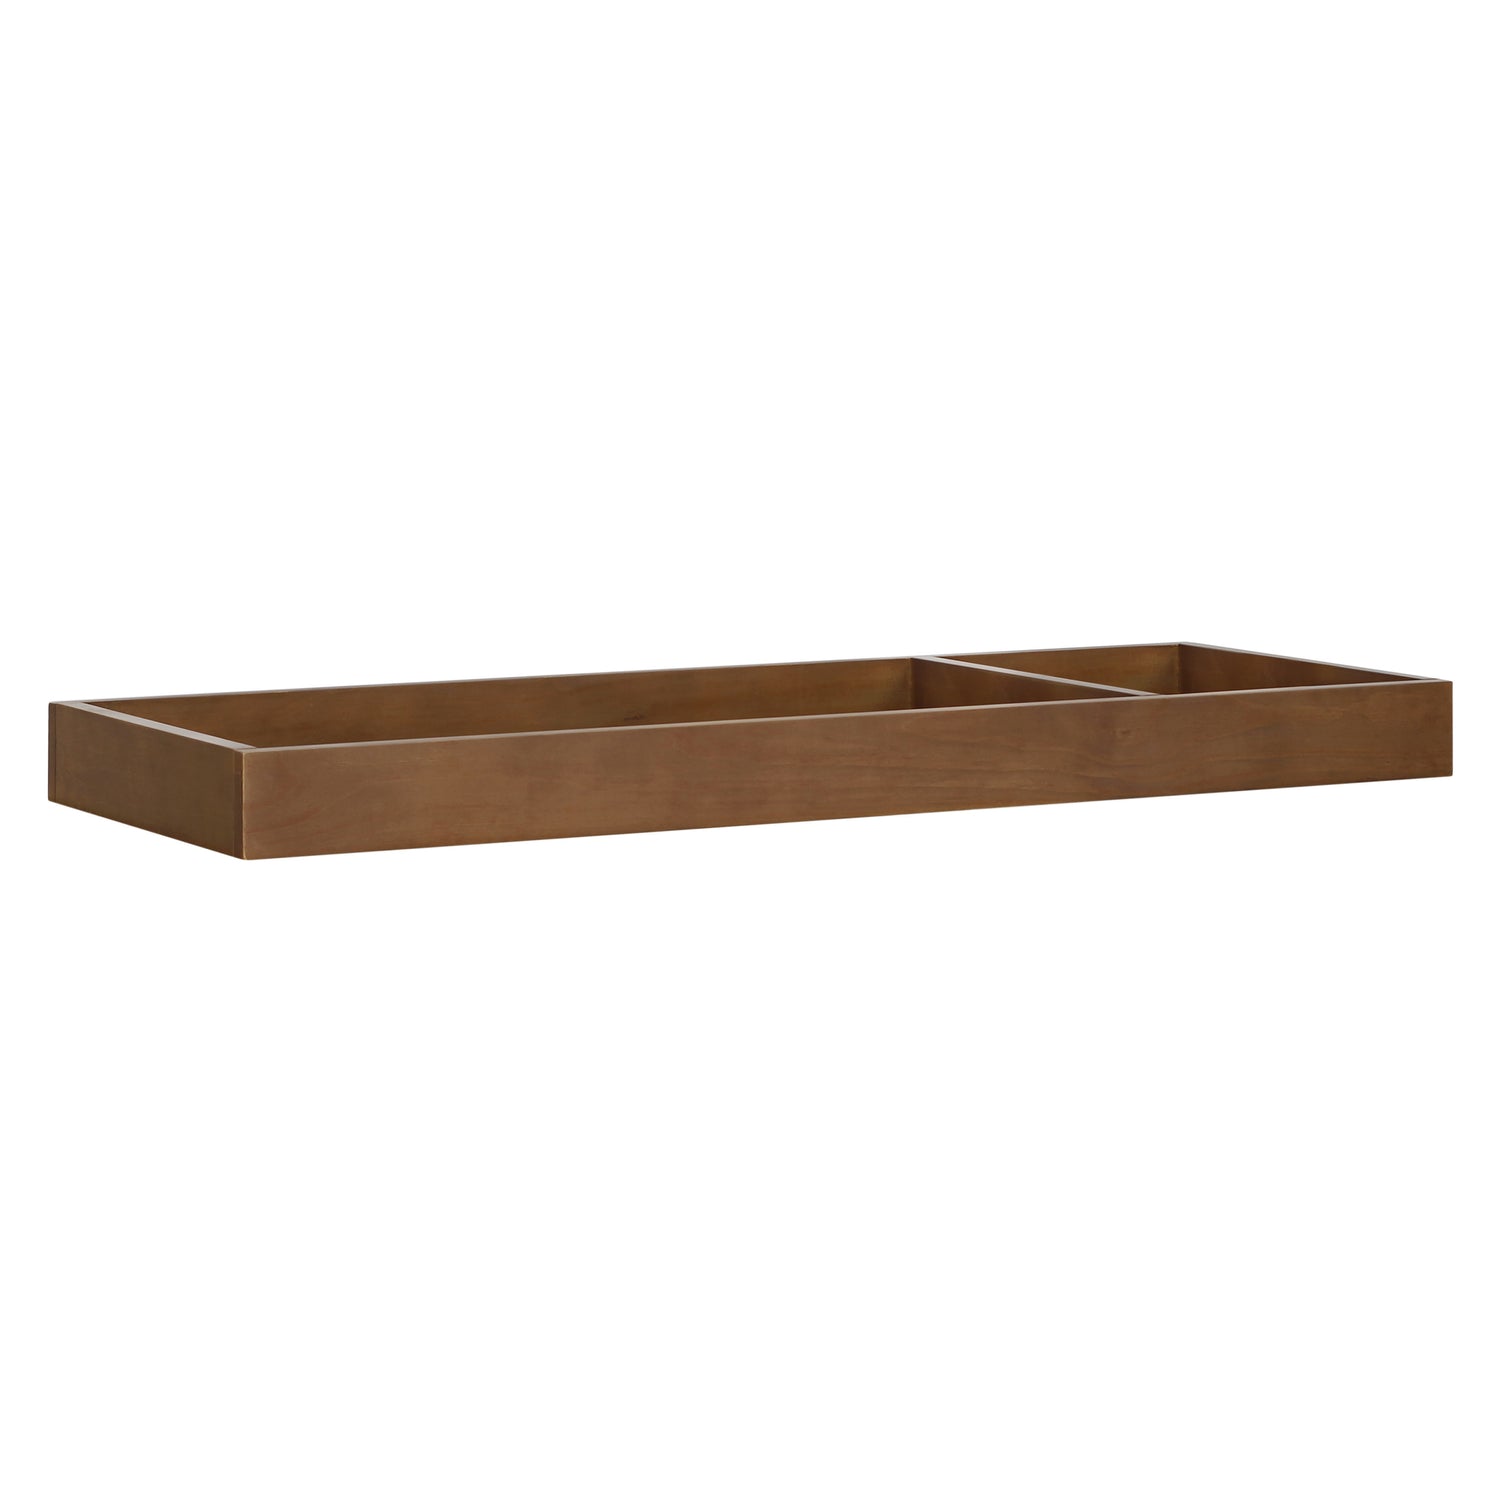 M0619MO,Universal Wide Removable Changing Tray in Mocha